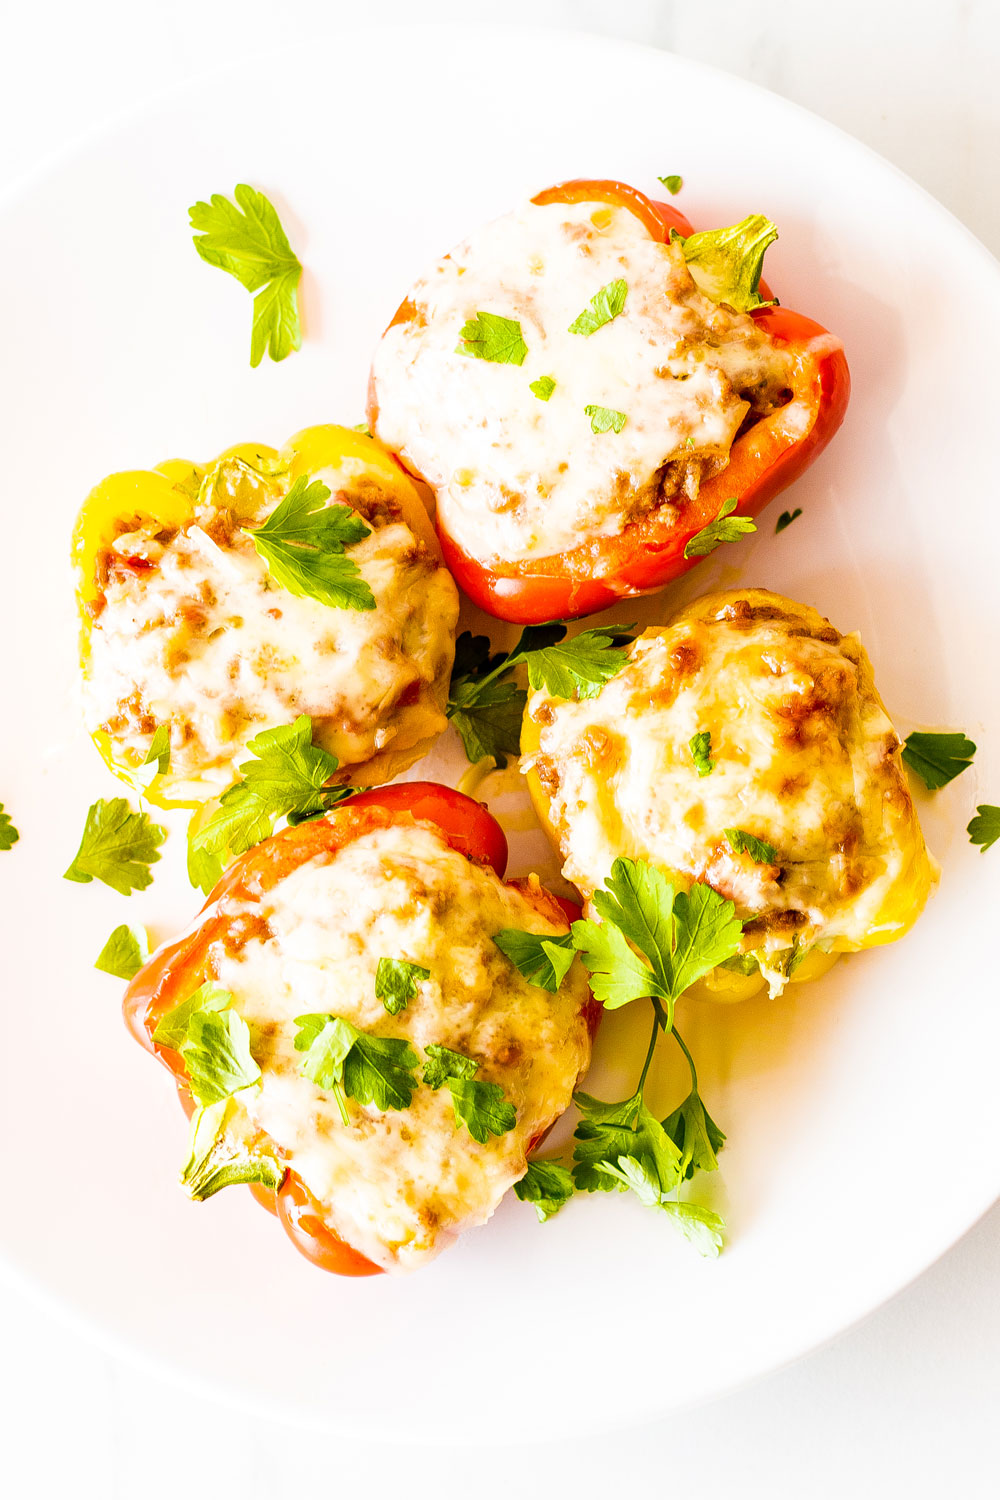 These Creamy Cheddar, Rice and Beef Stuffed Peppers are one of those feel-good meals that are perfect for weeknight dinners! https://www.spotebi.com/recipes/creamy-cheddar-rice-beef-stuffed-peppers/